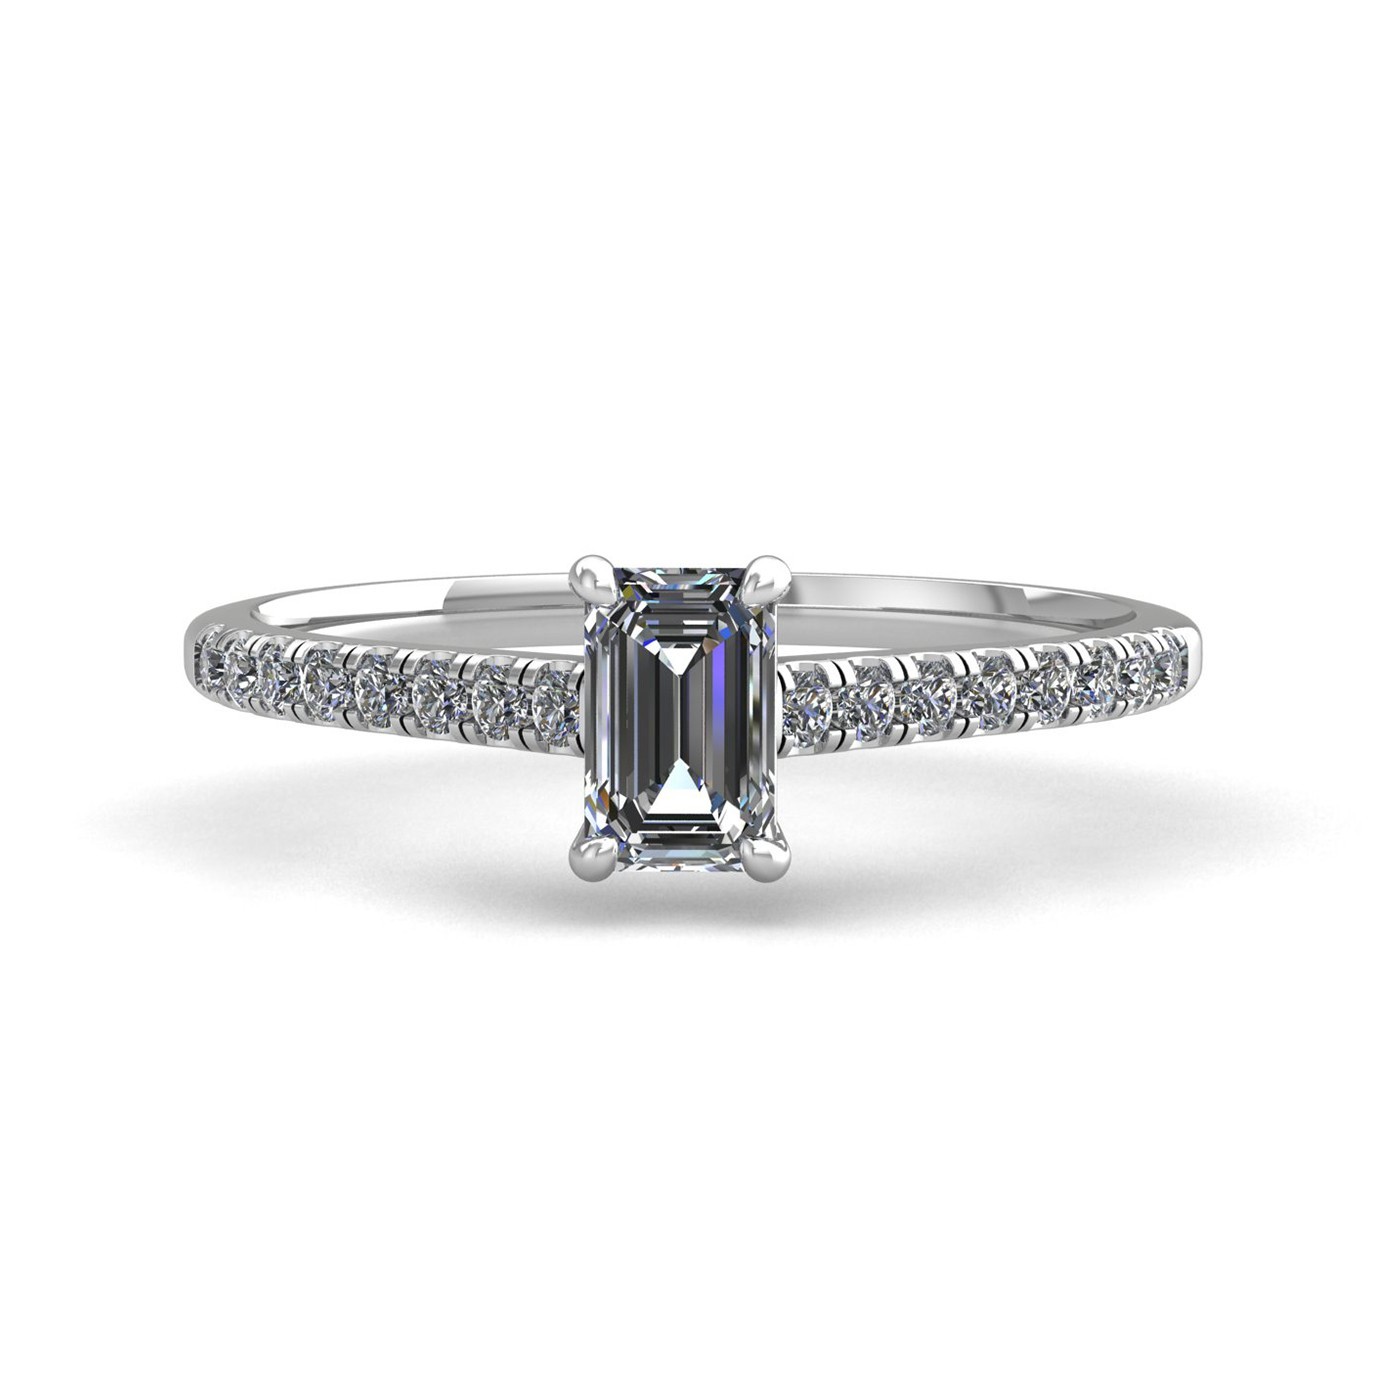 18K WHITE GOLD 0,30 CT 4 PRONGS EMERALD CUT DIAMOND ENGAGEMENT RING WITH WHISPER THIN PAVÉ SET BAND